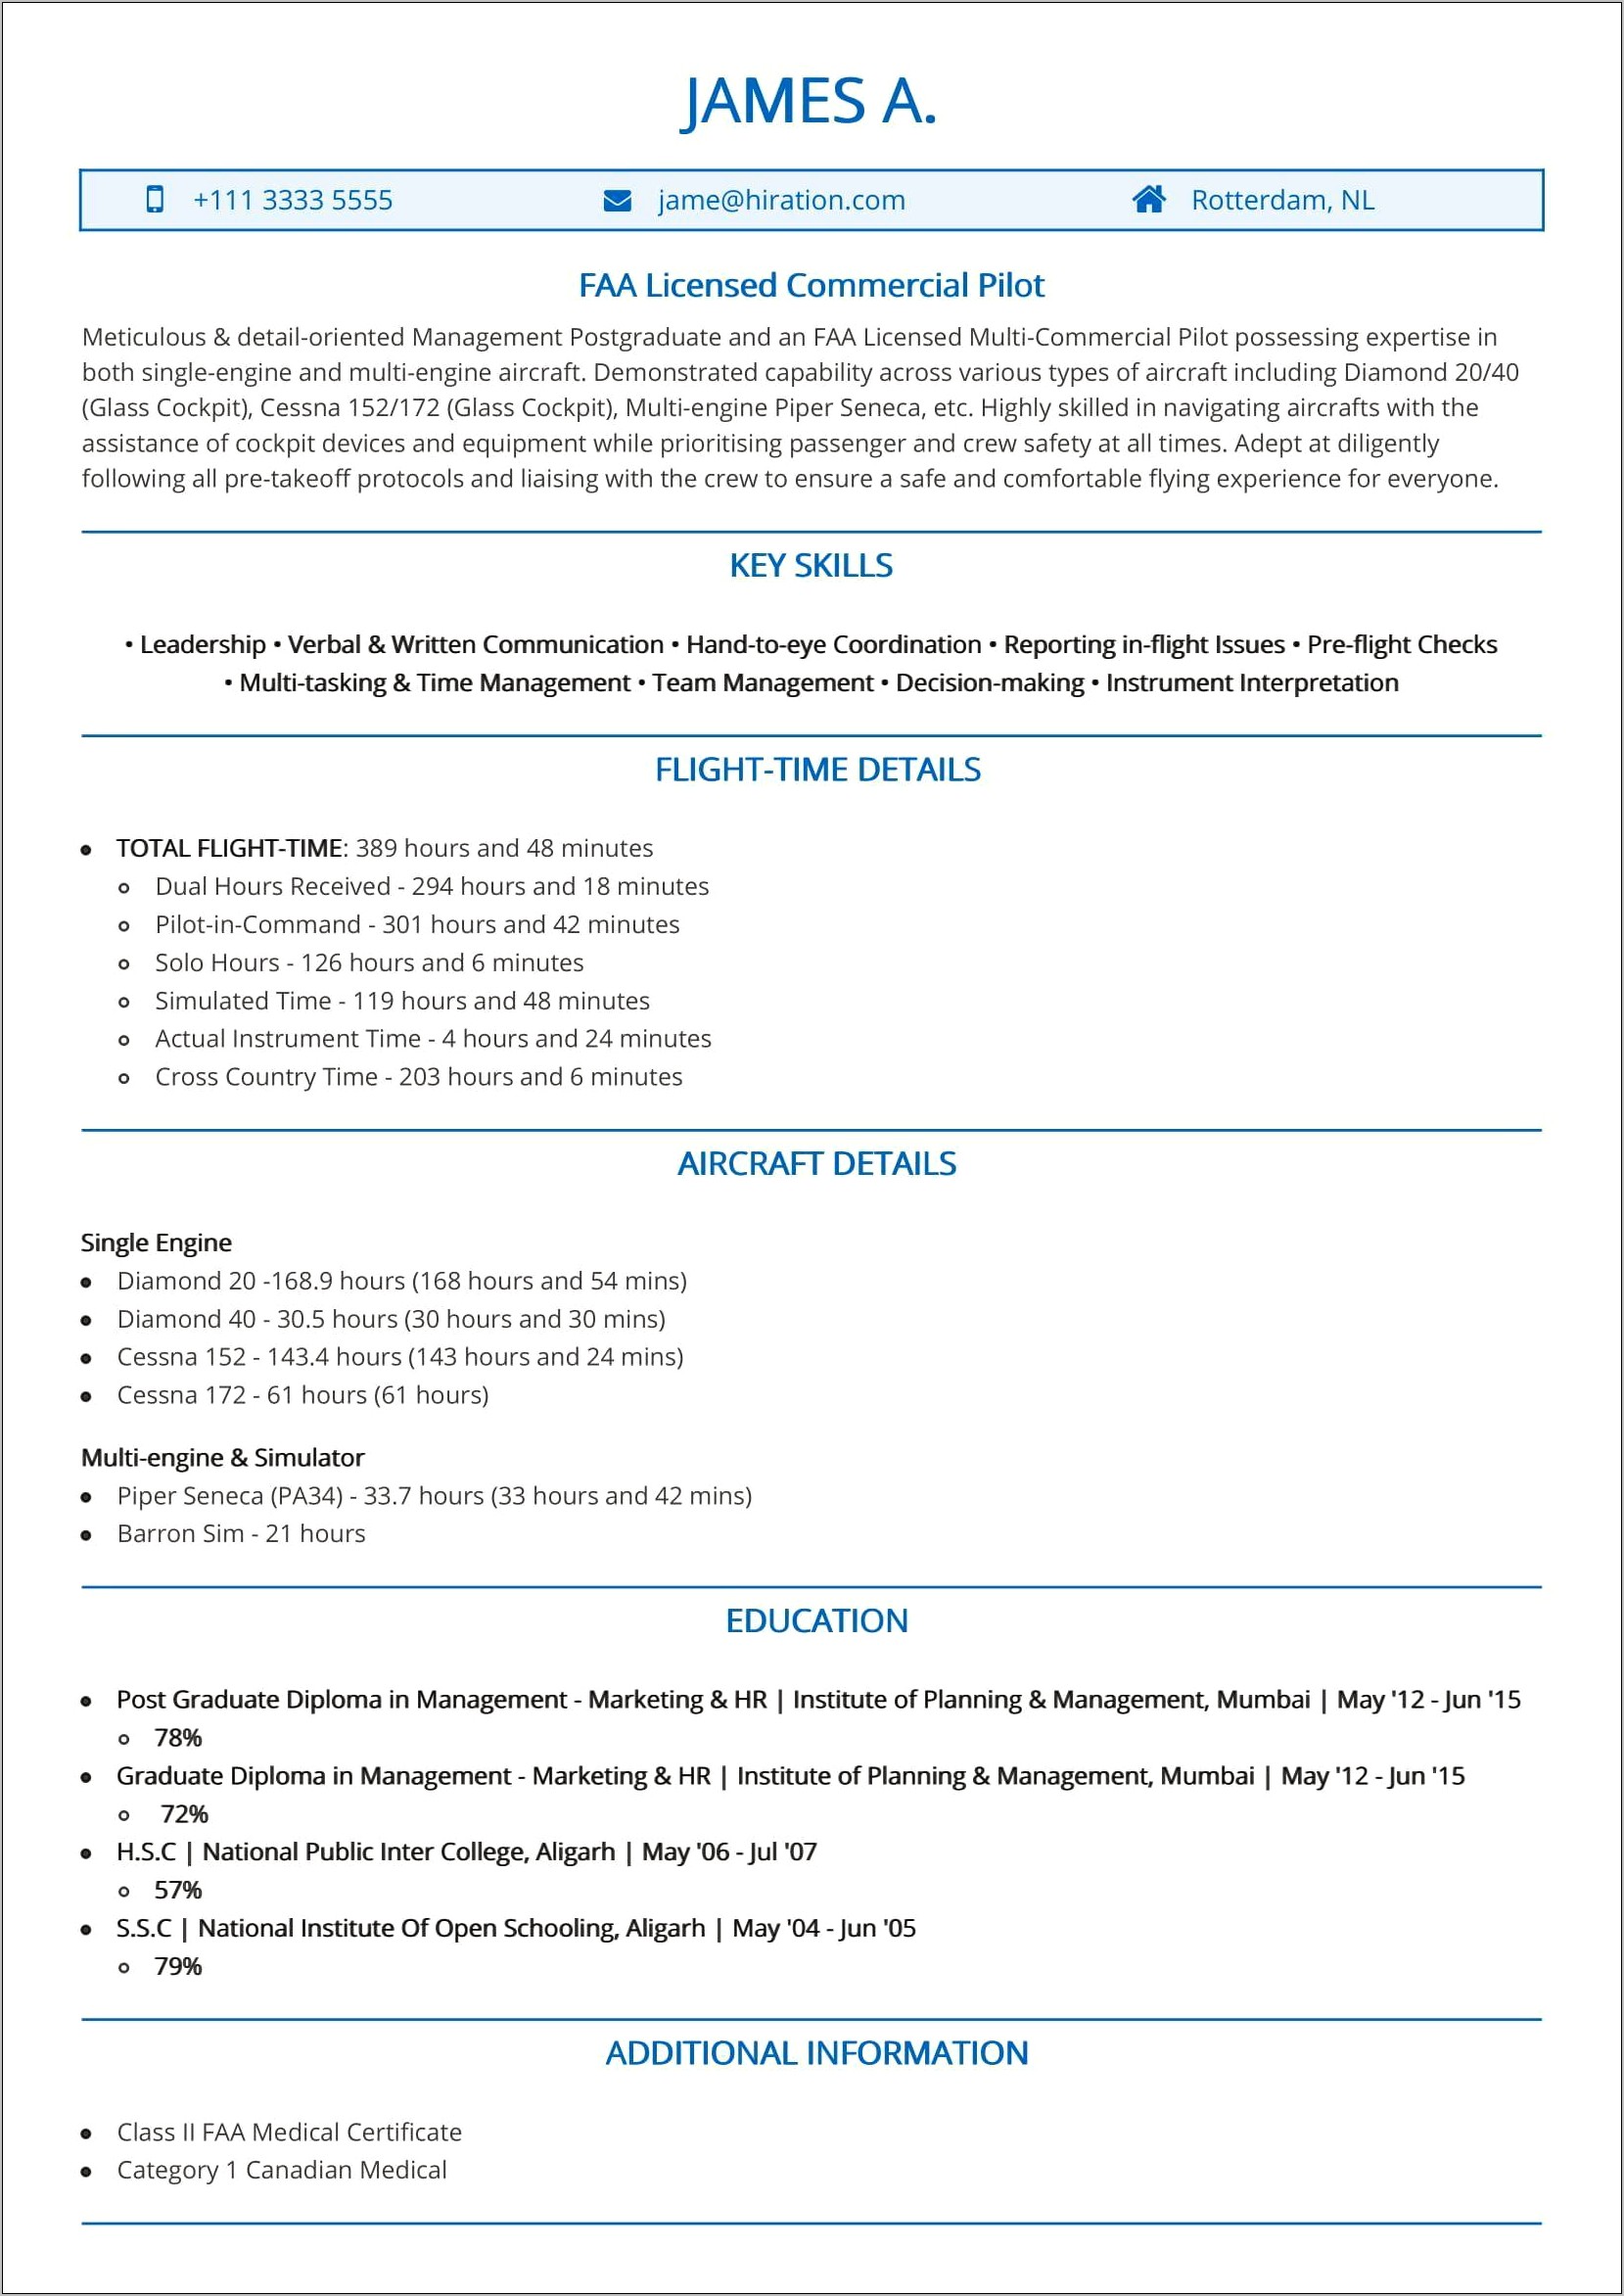 Sample Work Resume With Little Experience